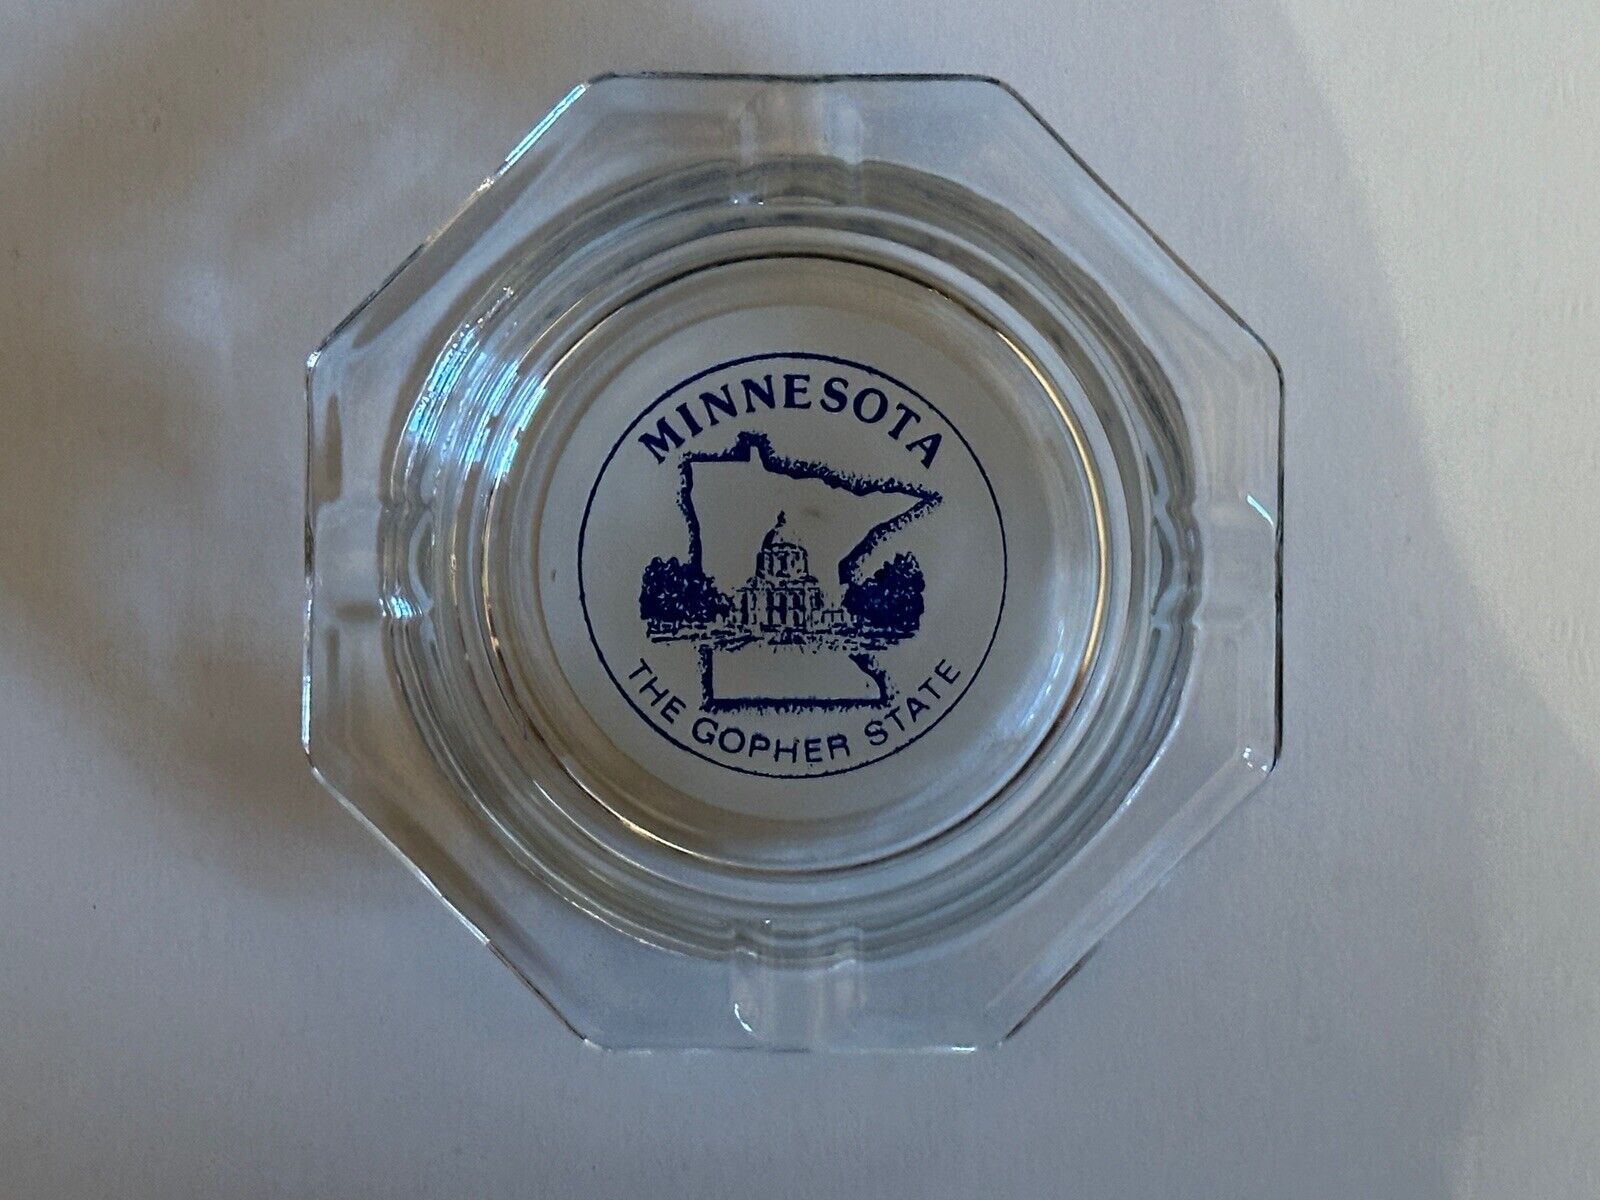 Vintage Clear Glass Octagon Shape Ashtray Minnesota The Gopher State 4.5” Unused Без бренда